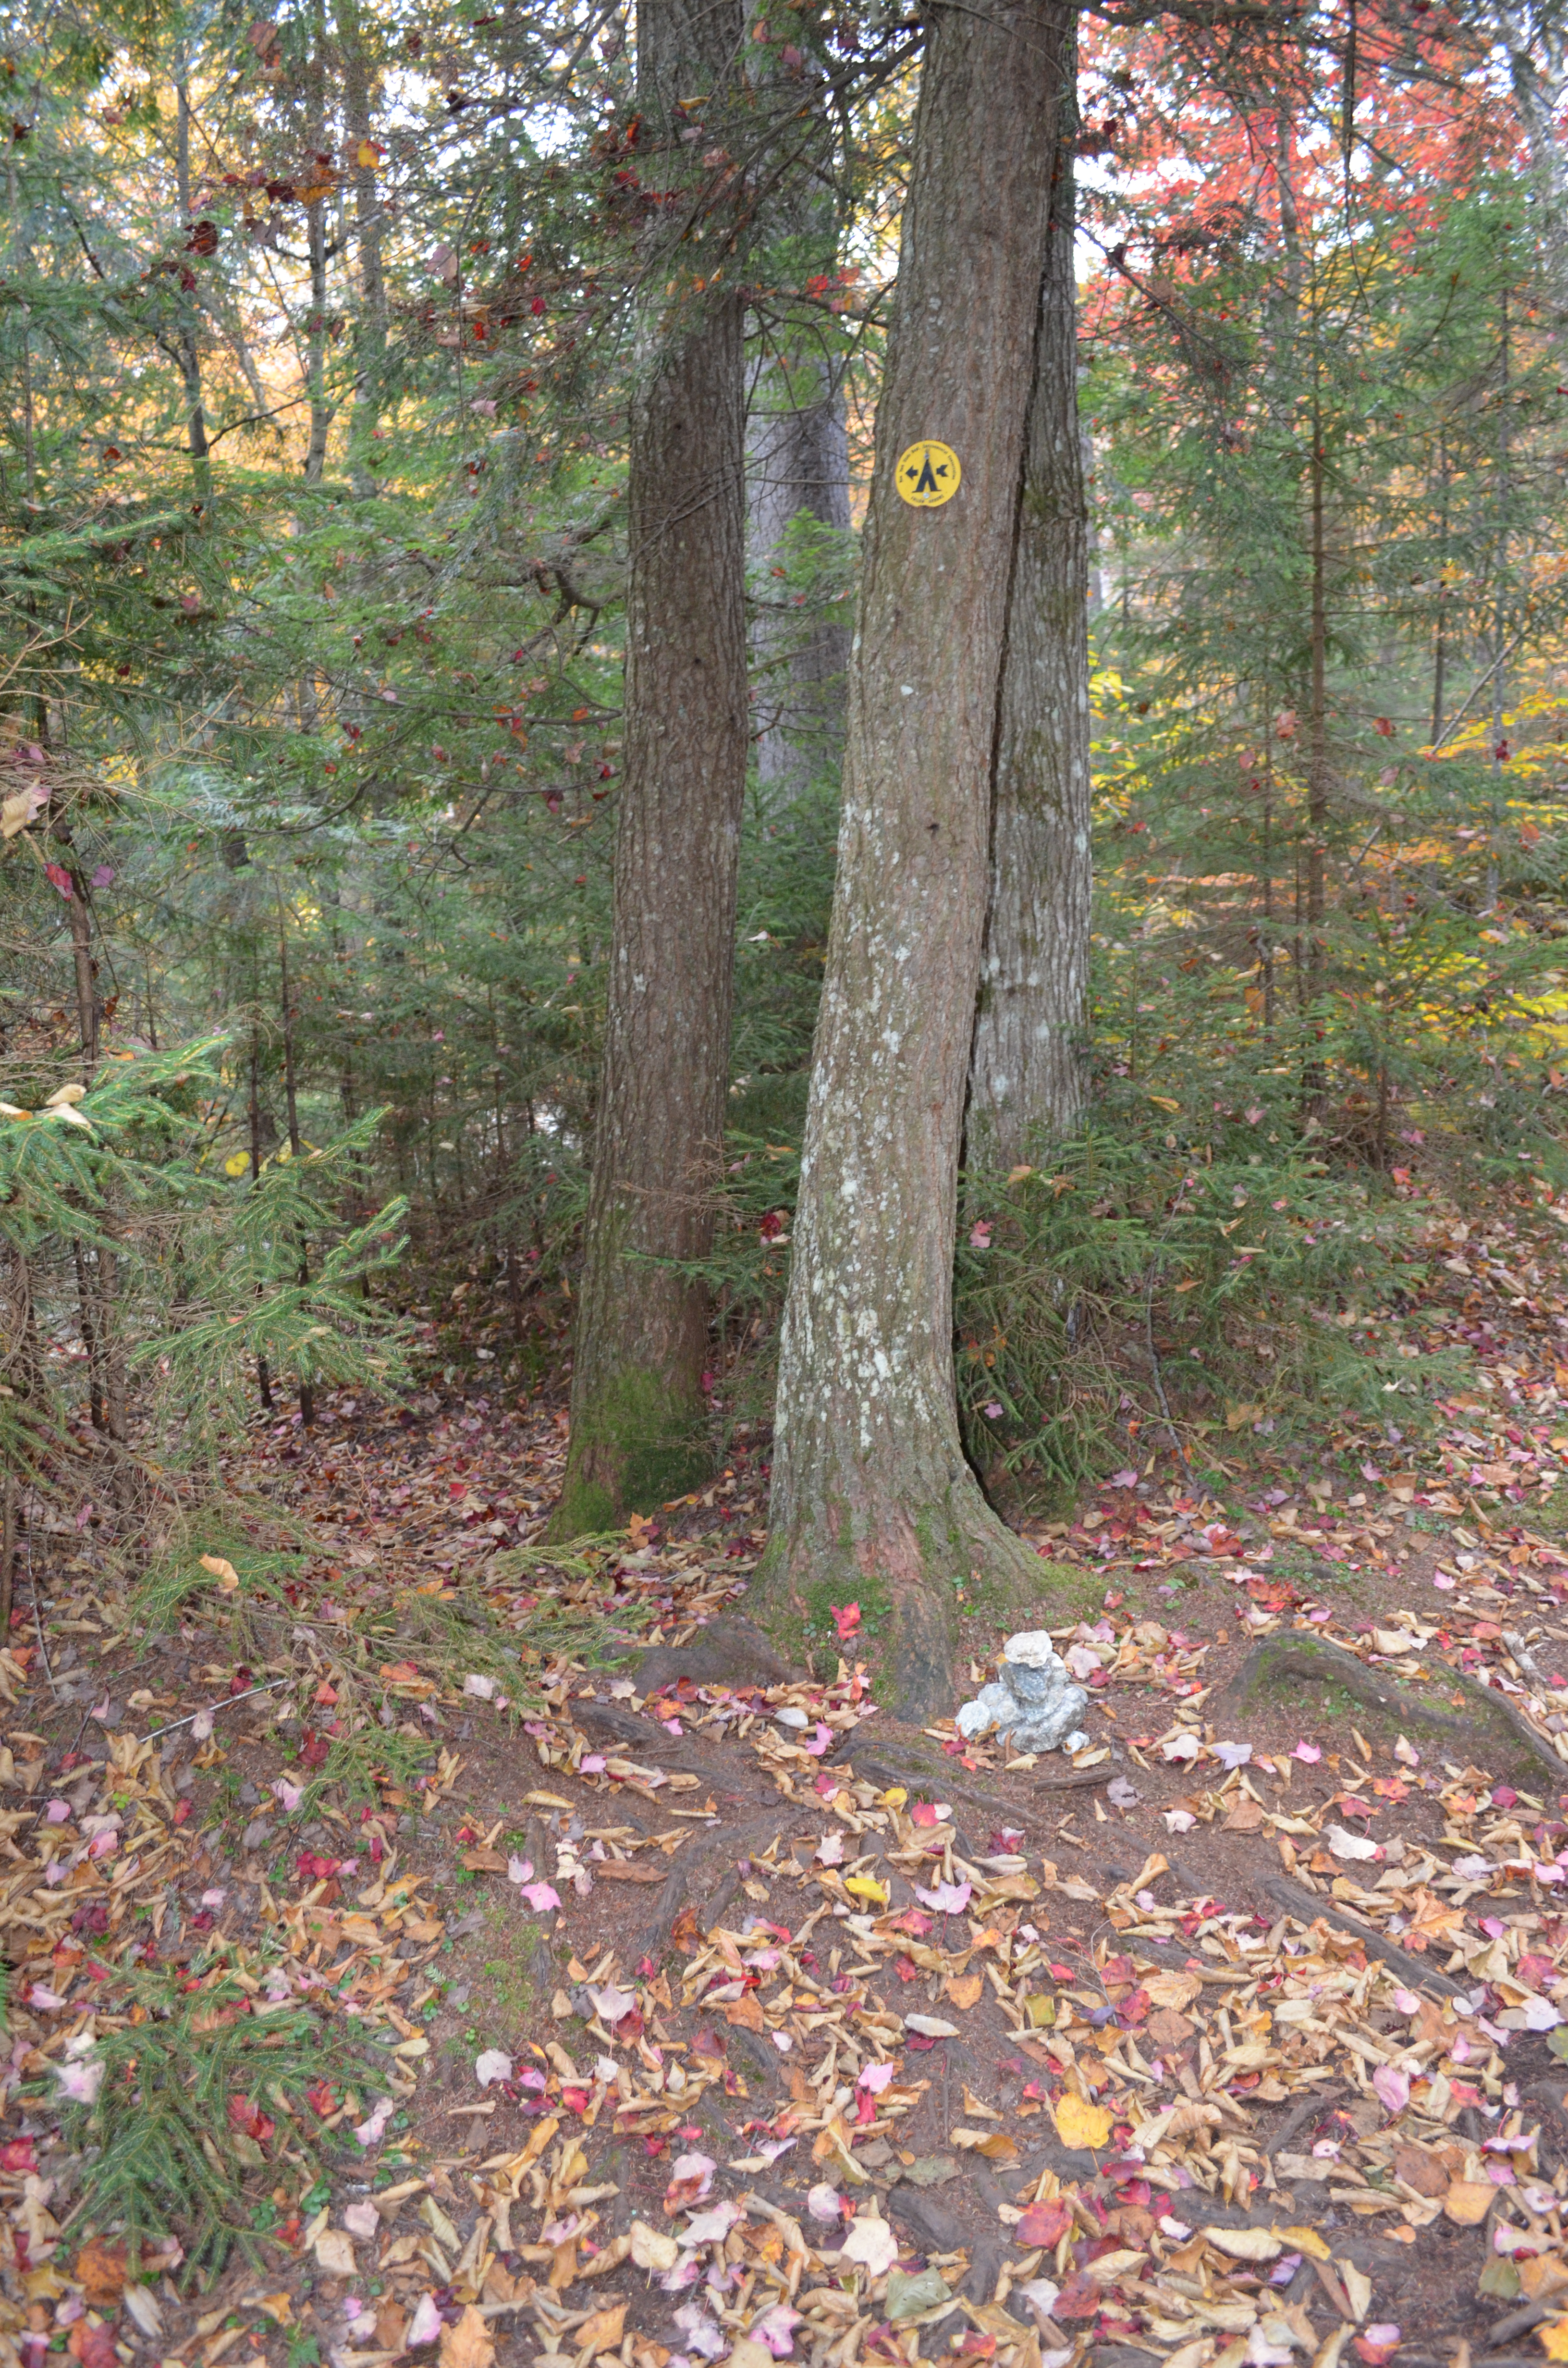 Yellow DEC Camping disc, marking site #1